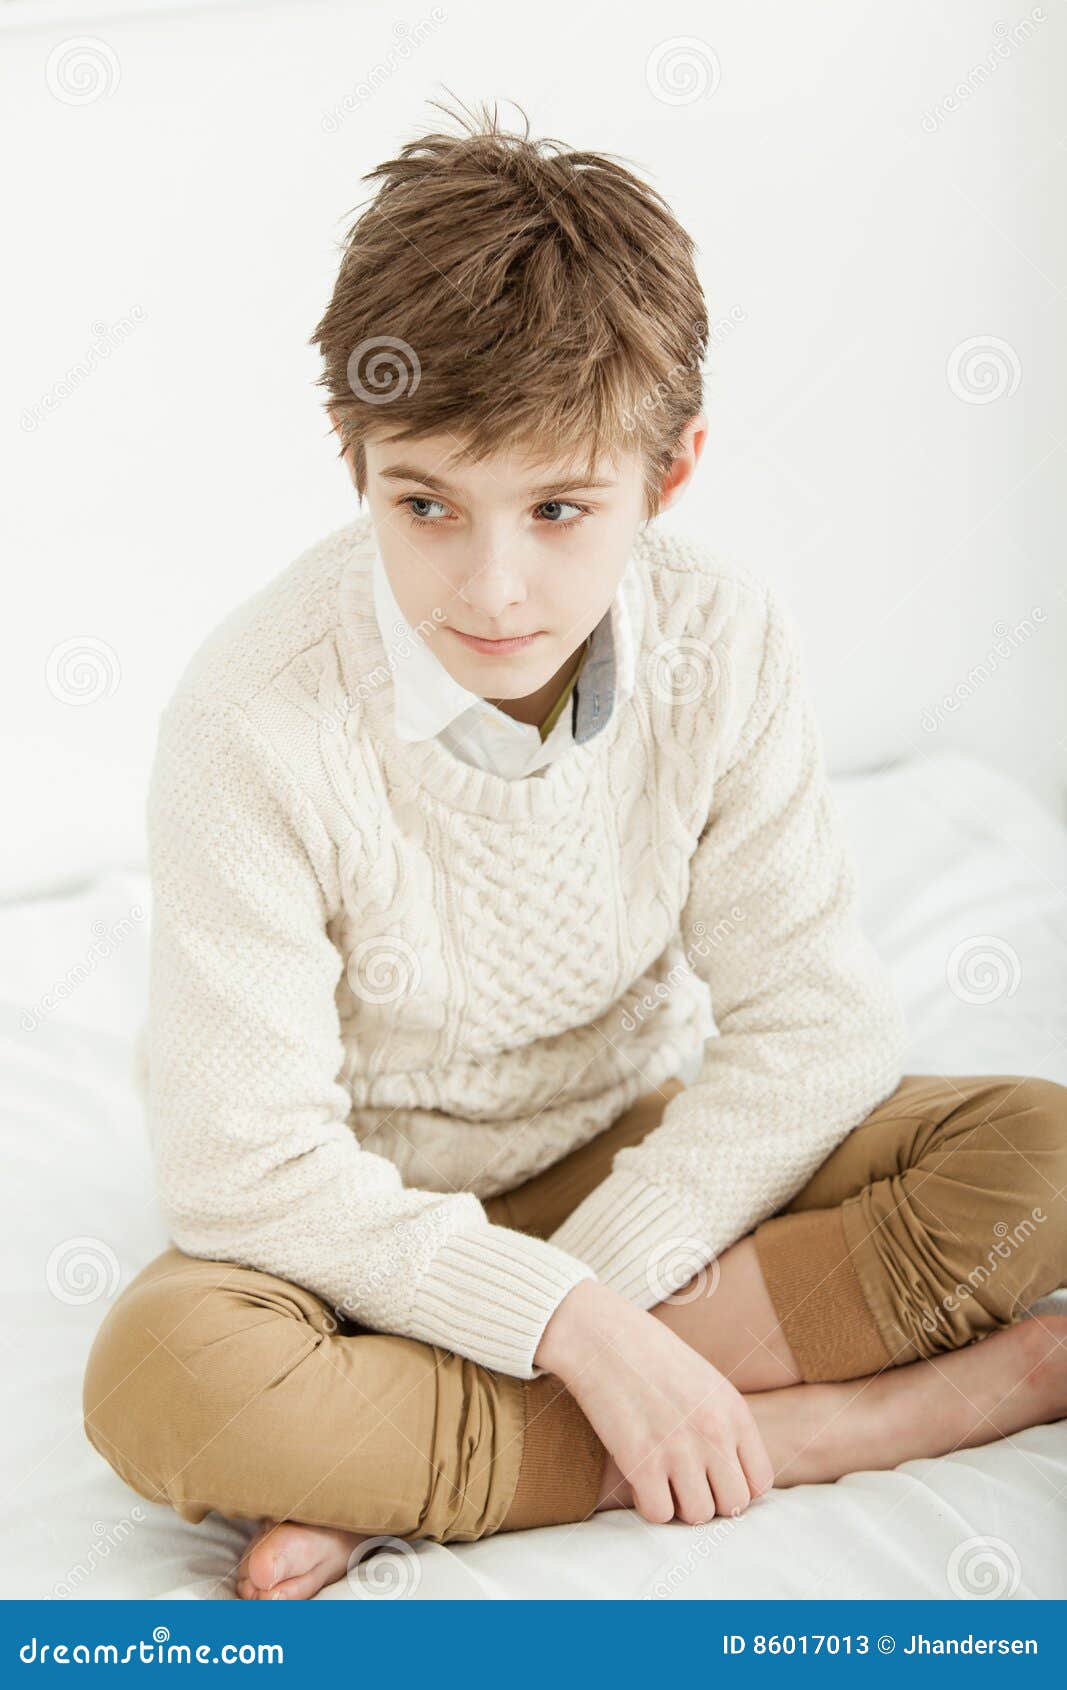 Thoughtful Young Boy Sitting on His Bed Stock Image - Image of ...